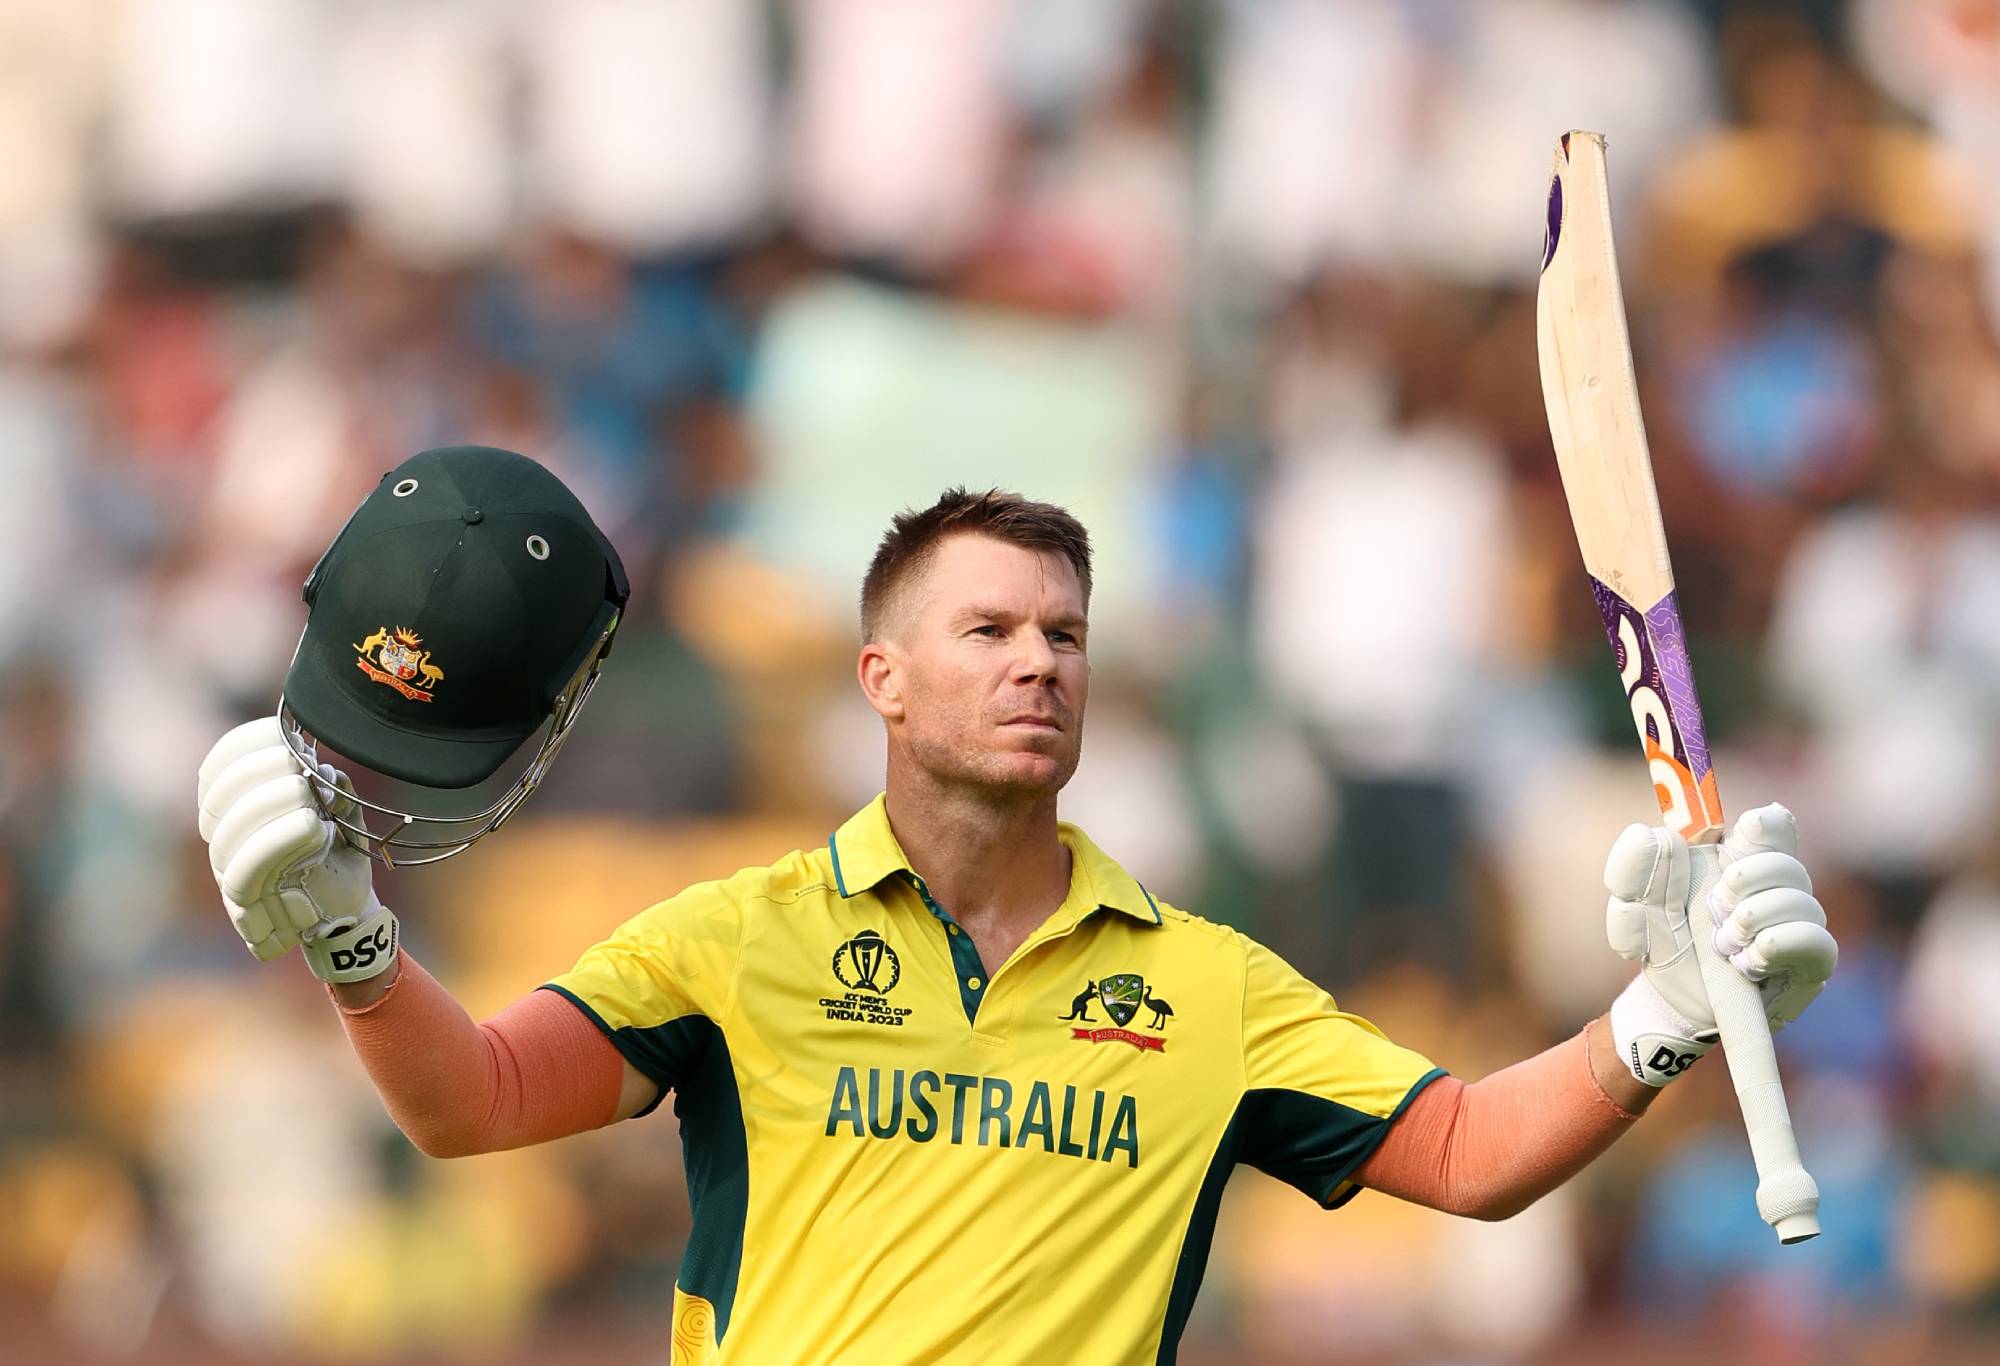 BANGALORE, INDIA - OCTOBER 20: David Warner of Australia celebrates their century during the ICC Men's Cricket World Cup India 2023 between Australia and Pakistan at M. Chinnaswamy Stadium on October 20, 2023 in Bangalore, India. (Photo by Robert Cianflone/Getty Images)